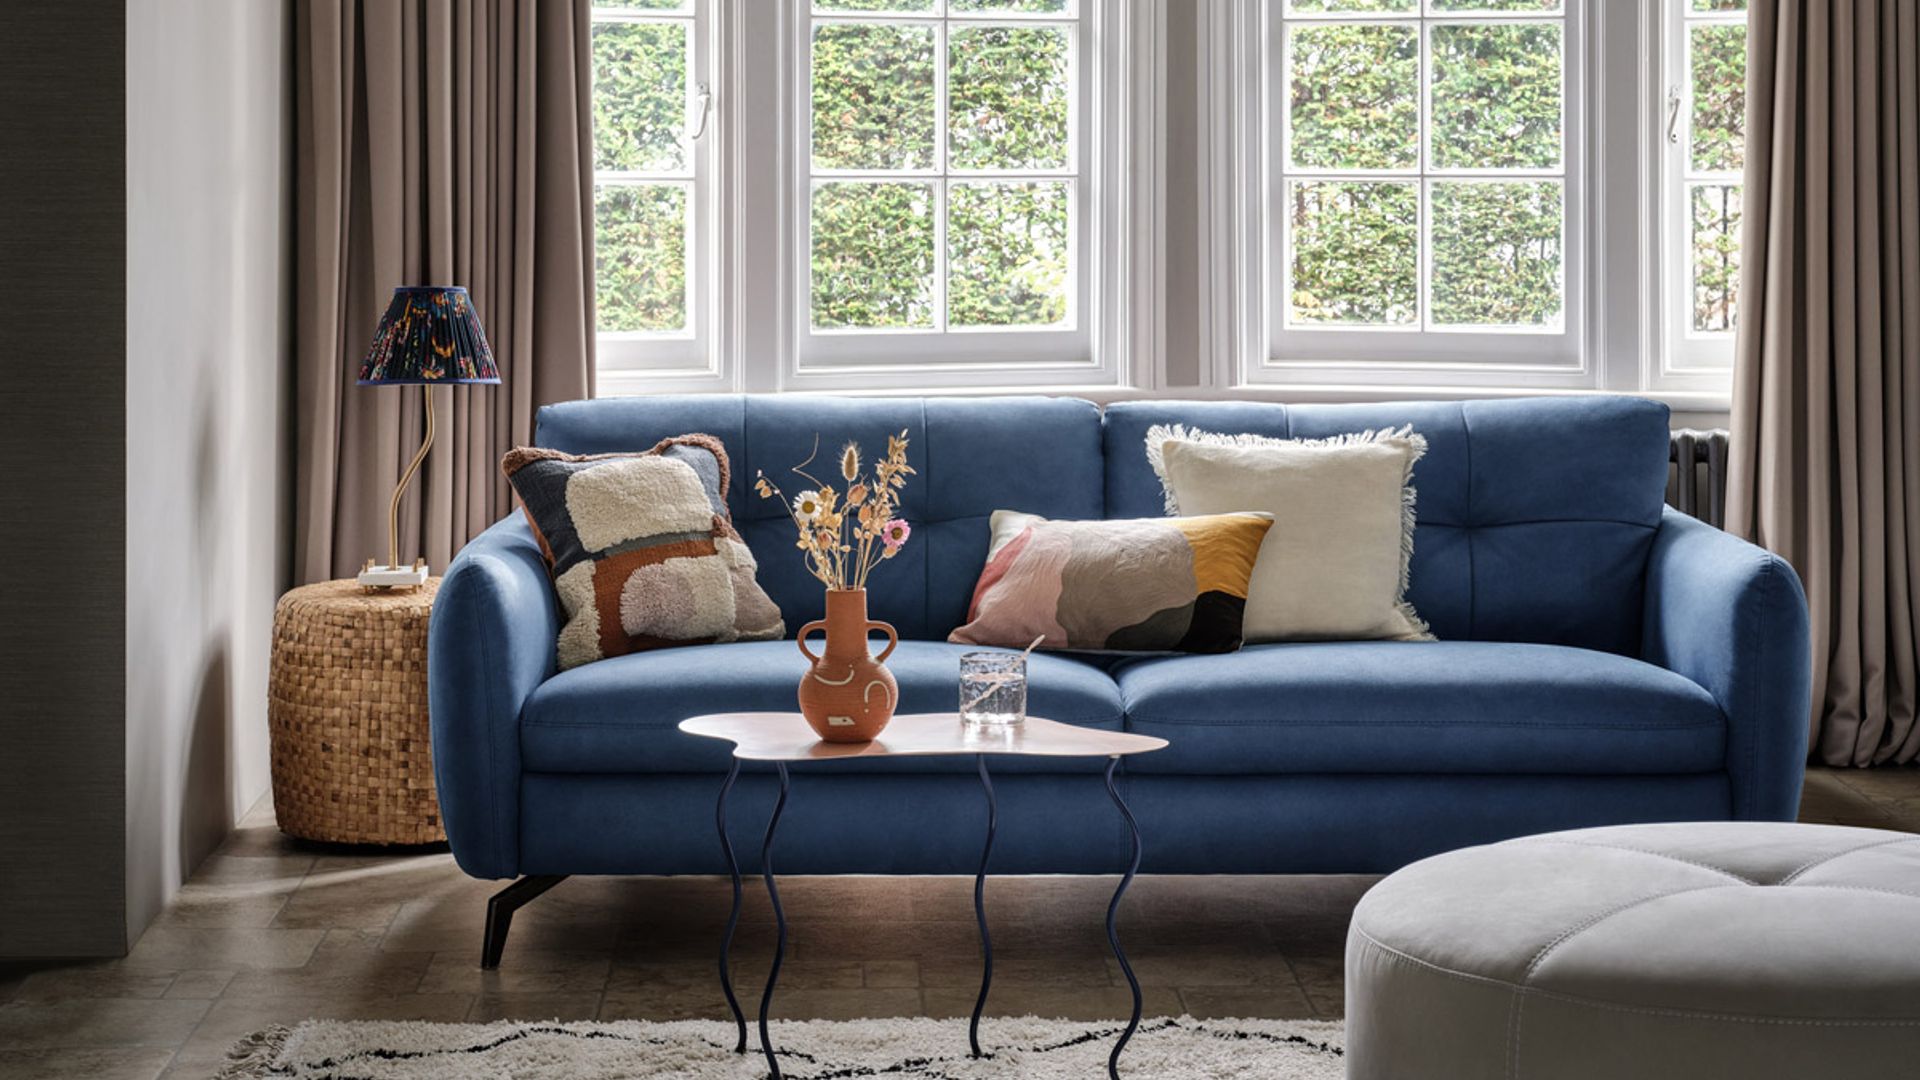 The Ultimate Best Sofas Guide For 2023 The Big Trends And The Top Sofa Brands To Choose From Hello